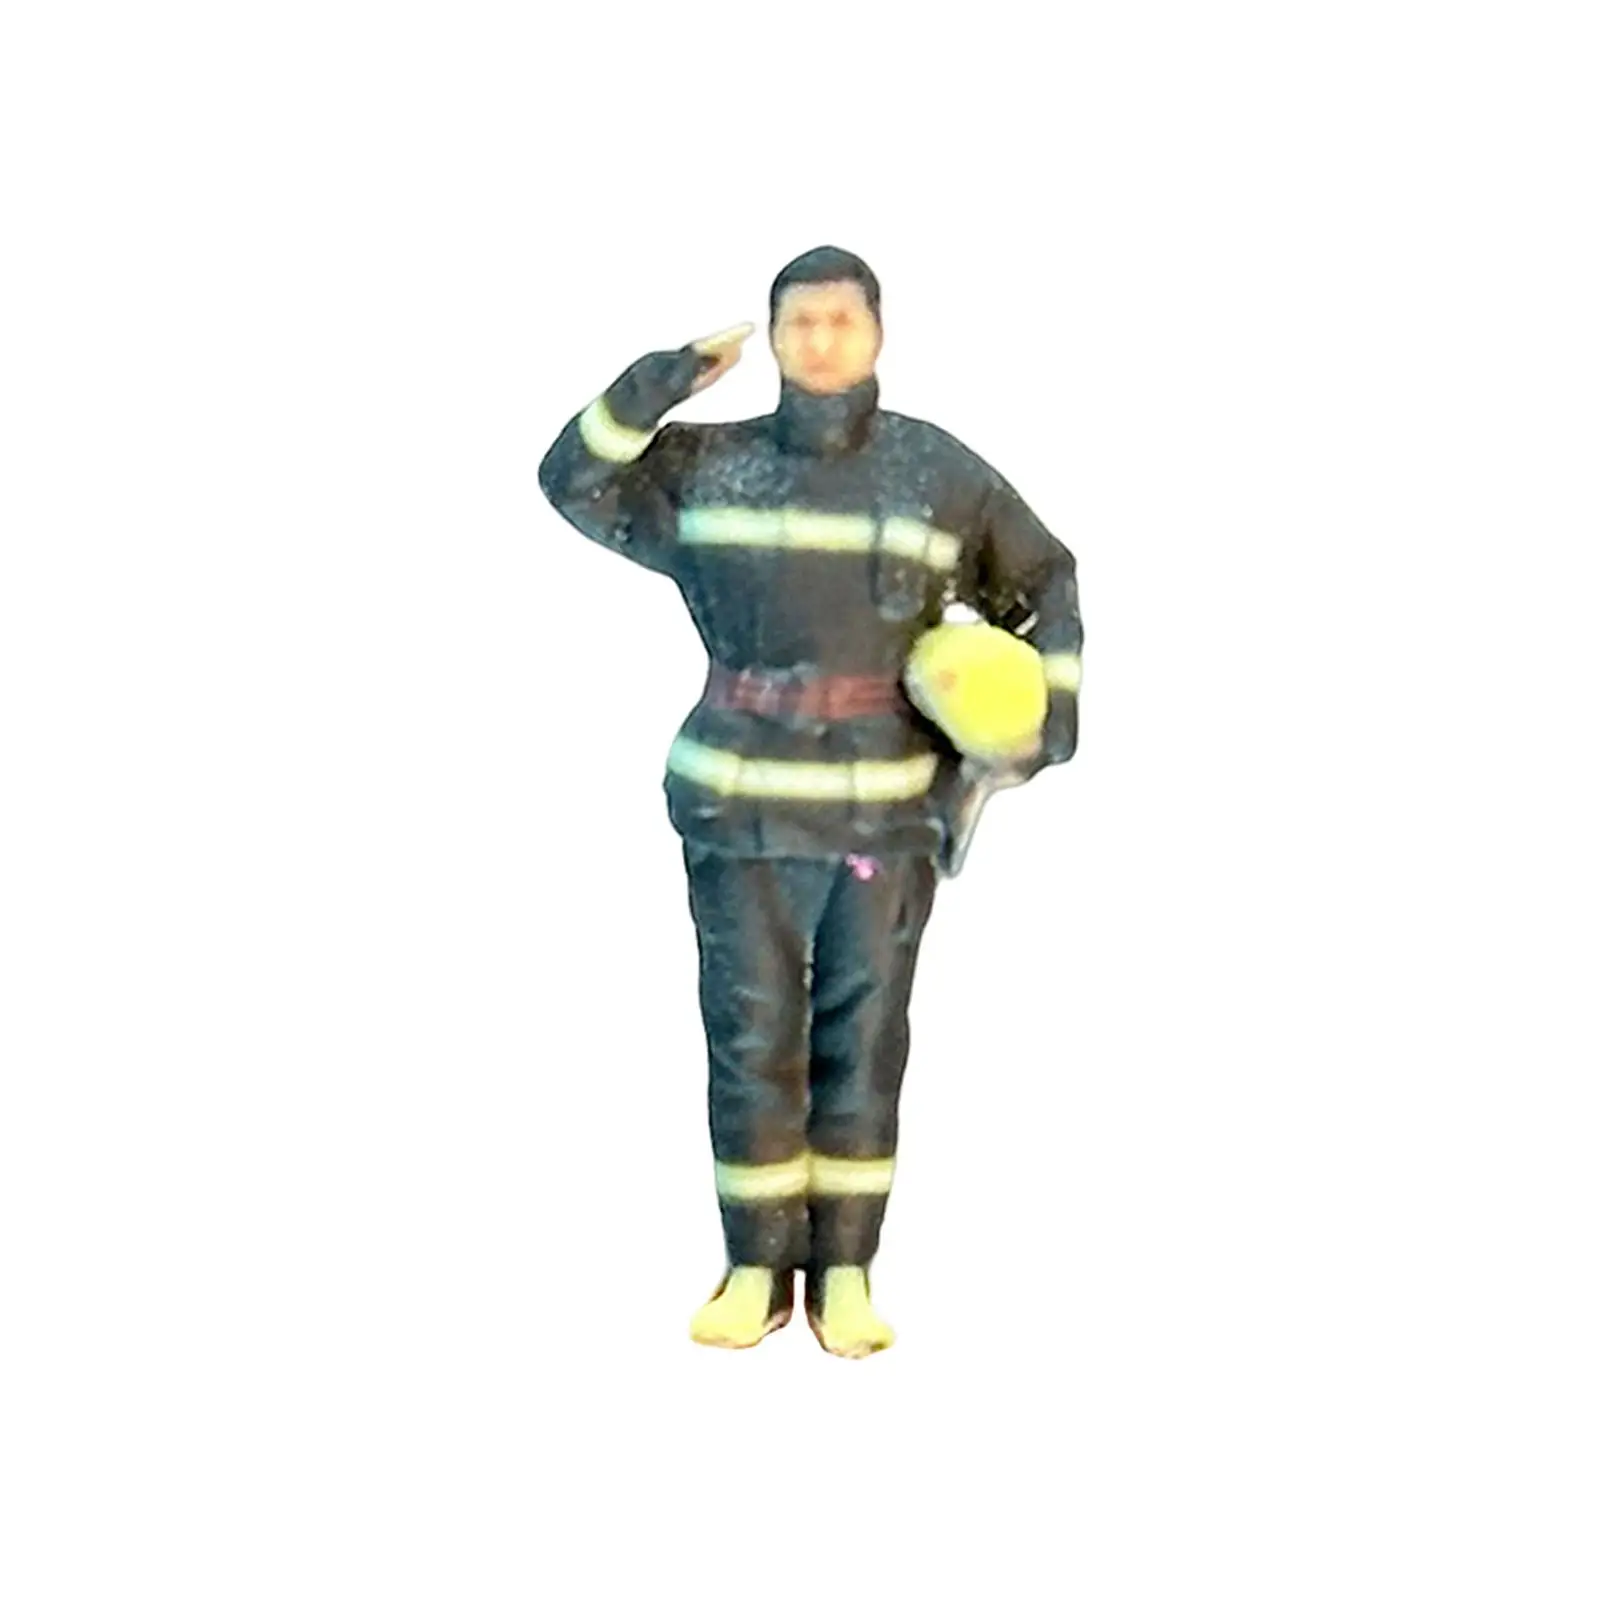 1/64 Resin Firefighter Figures Collection Scene Props Figures Sand Table Ornament for Scenery Landscape Building Diorama Layout